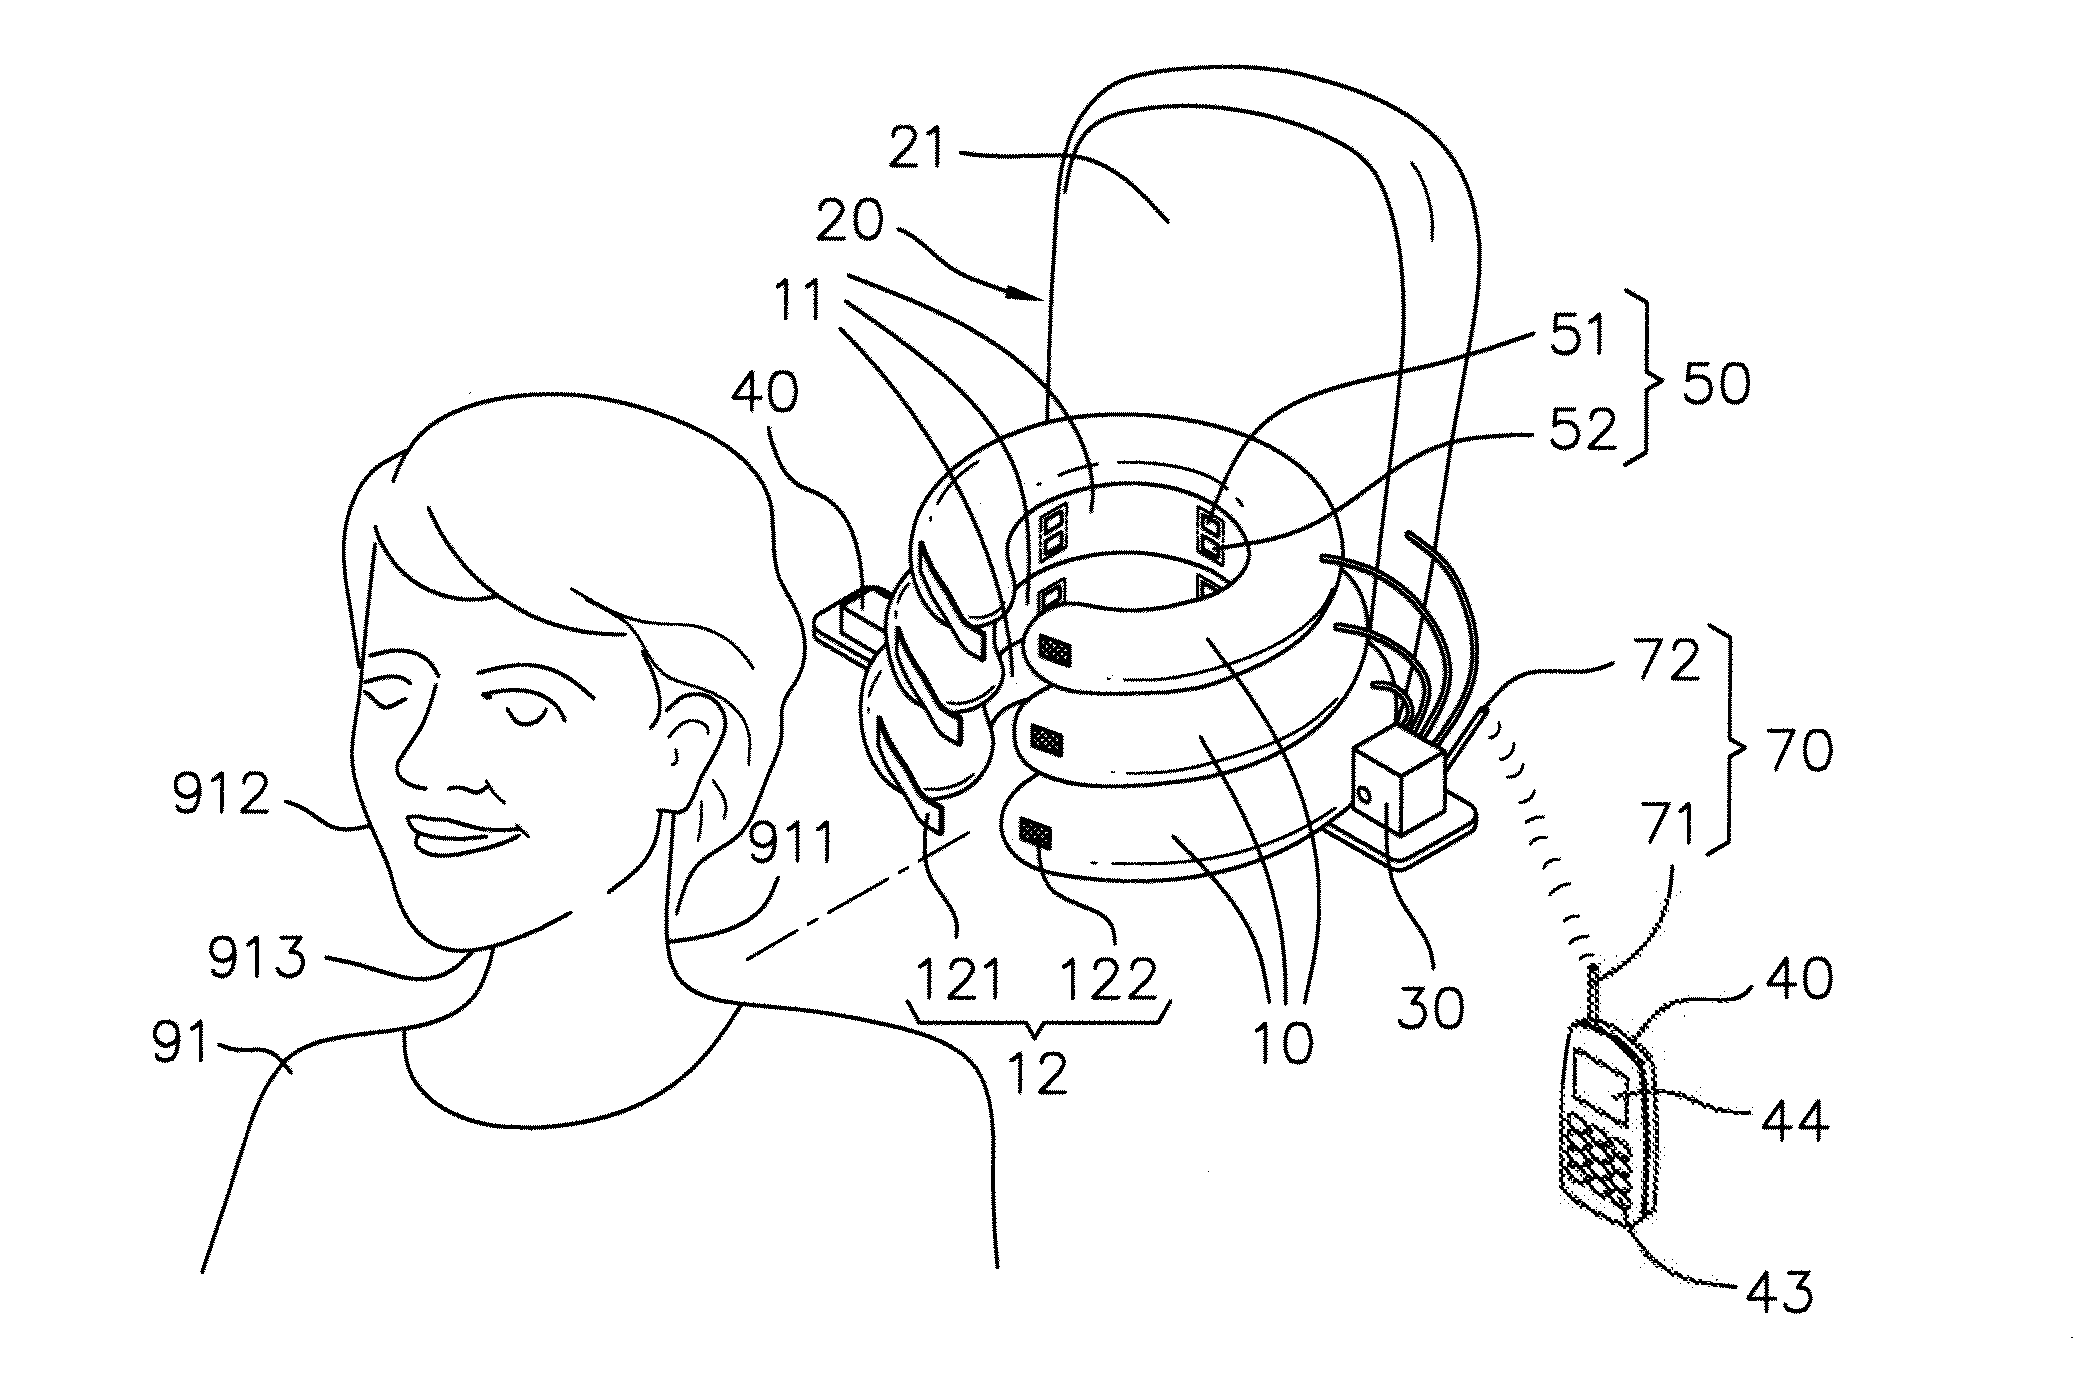 Inflation type cervical vertebrae rehabilitation device and method for using the same